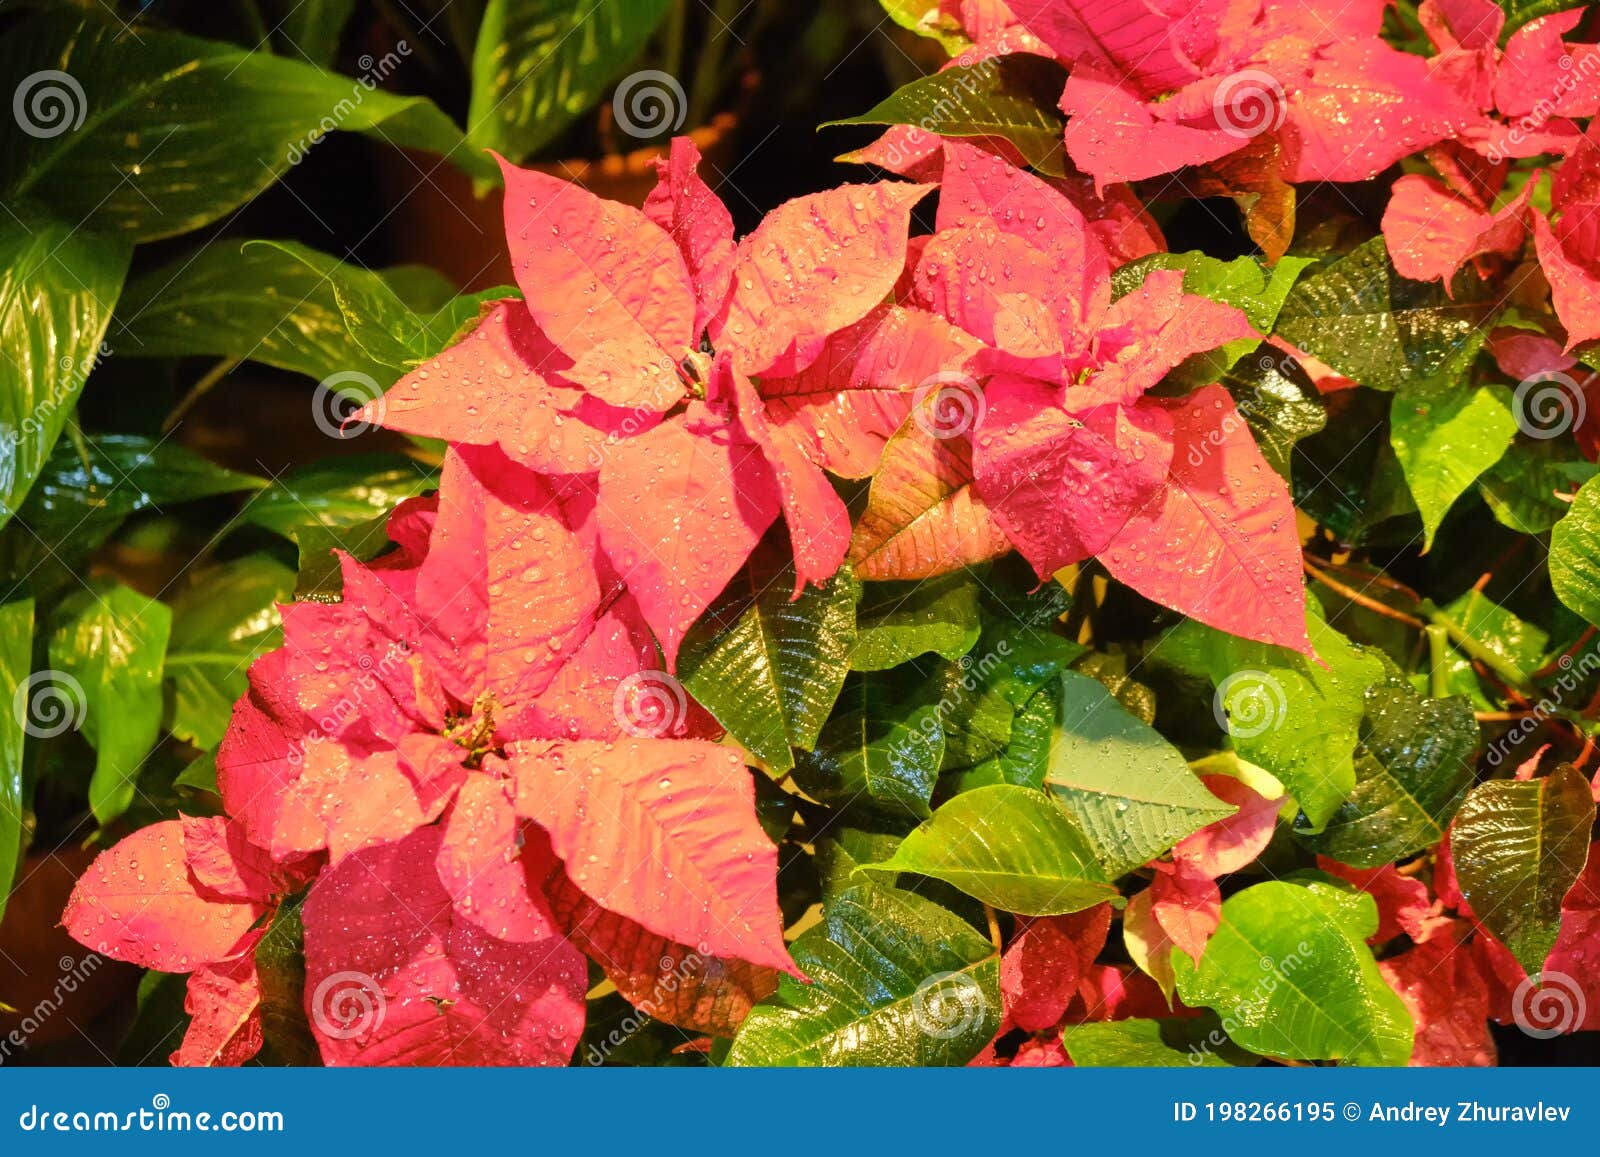 The Poinsettia Euphorbia Pulcherrima is a Commercially Important ...